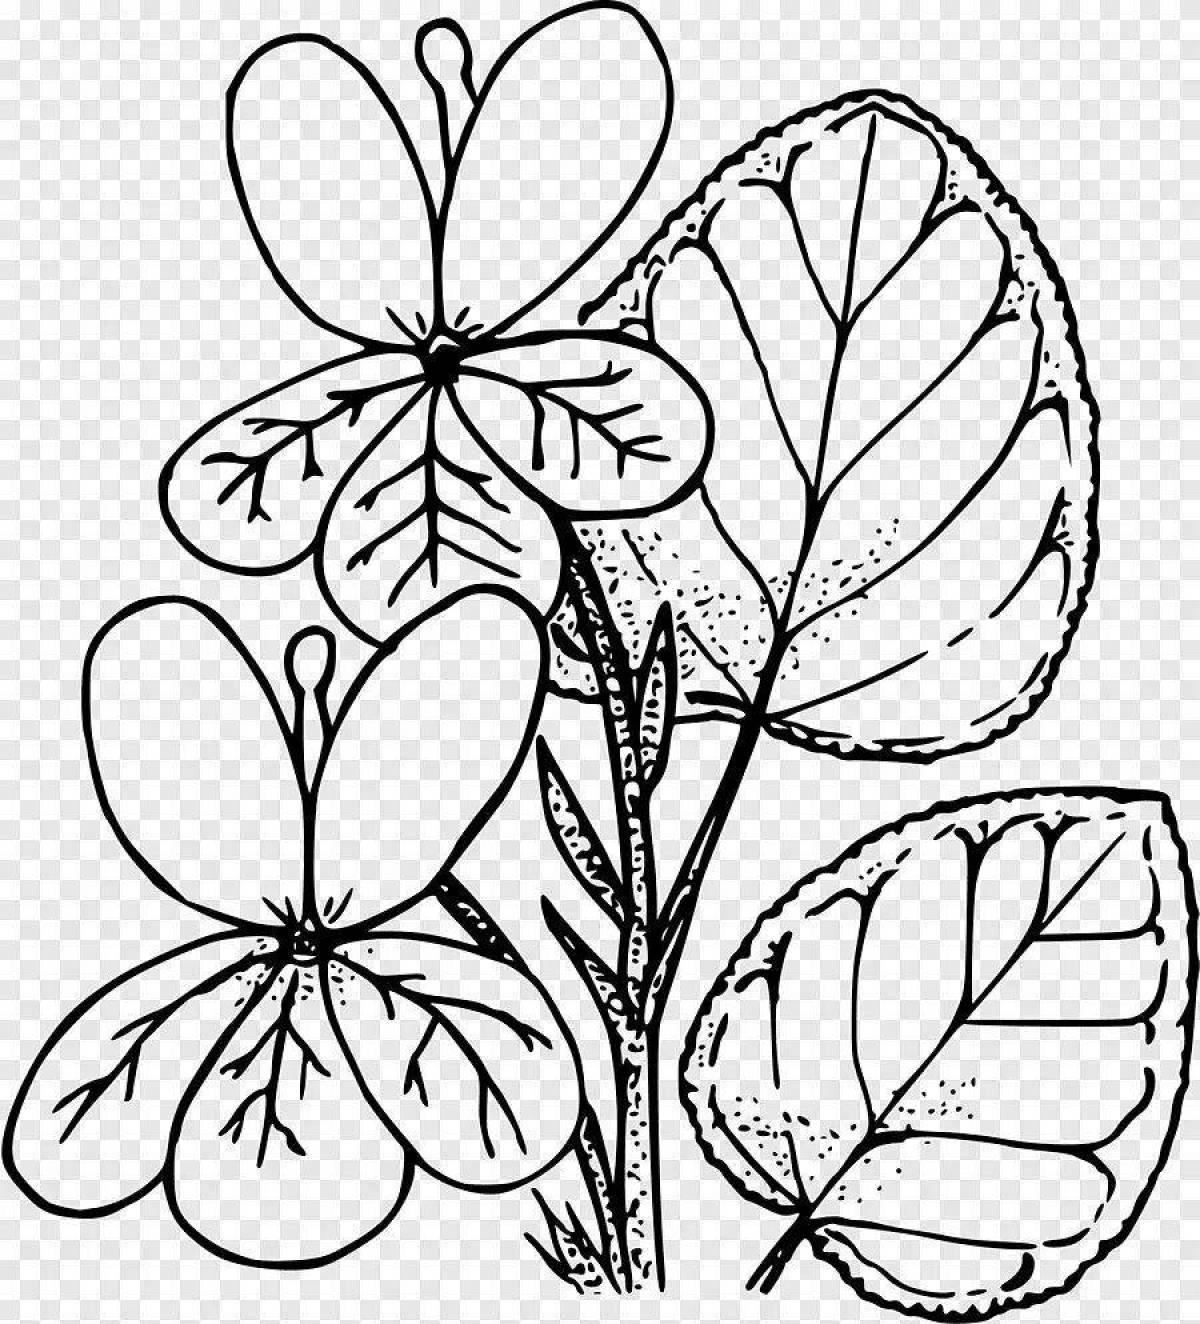 Refreshing purple flower coloring page